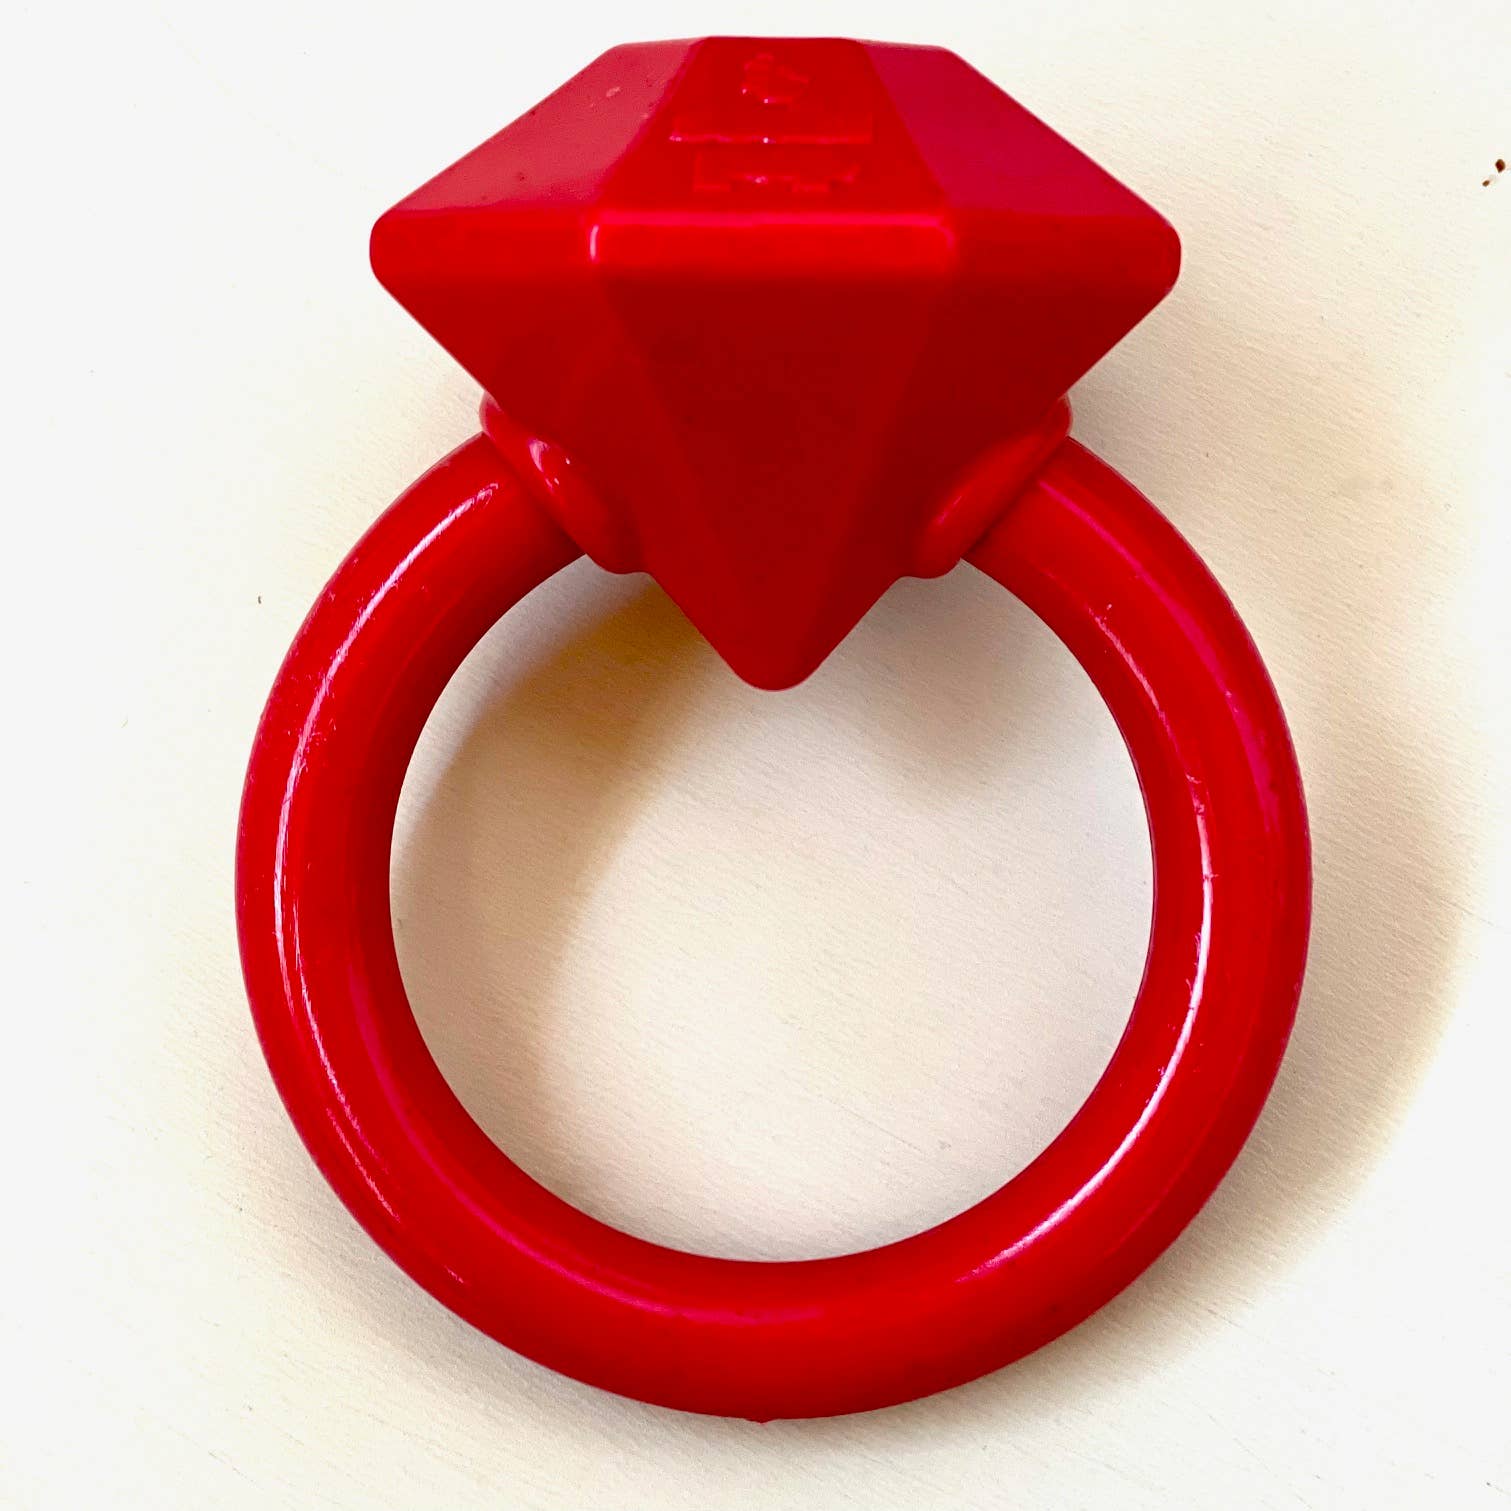 SP Diamond Ring Durable Nylon Teething Ring for Puppies